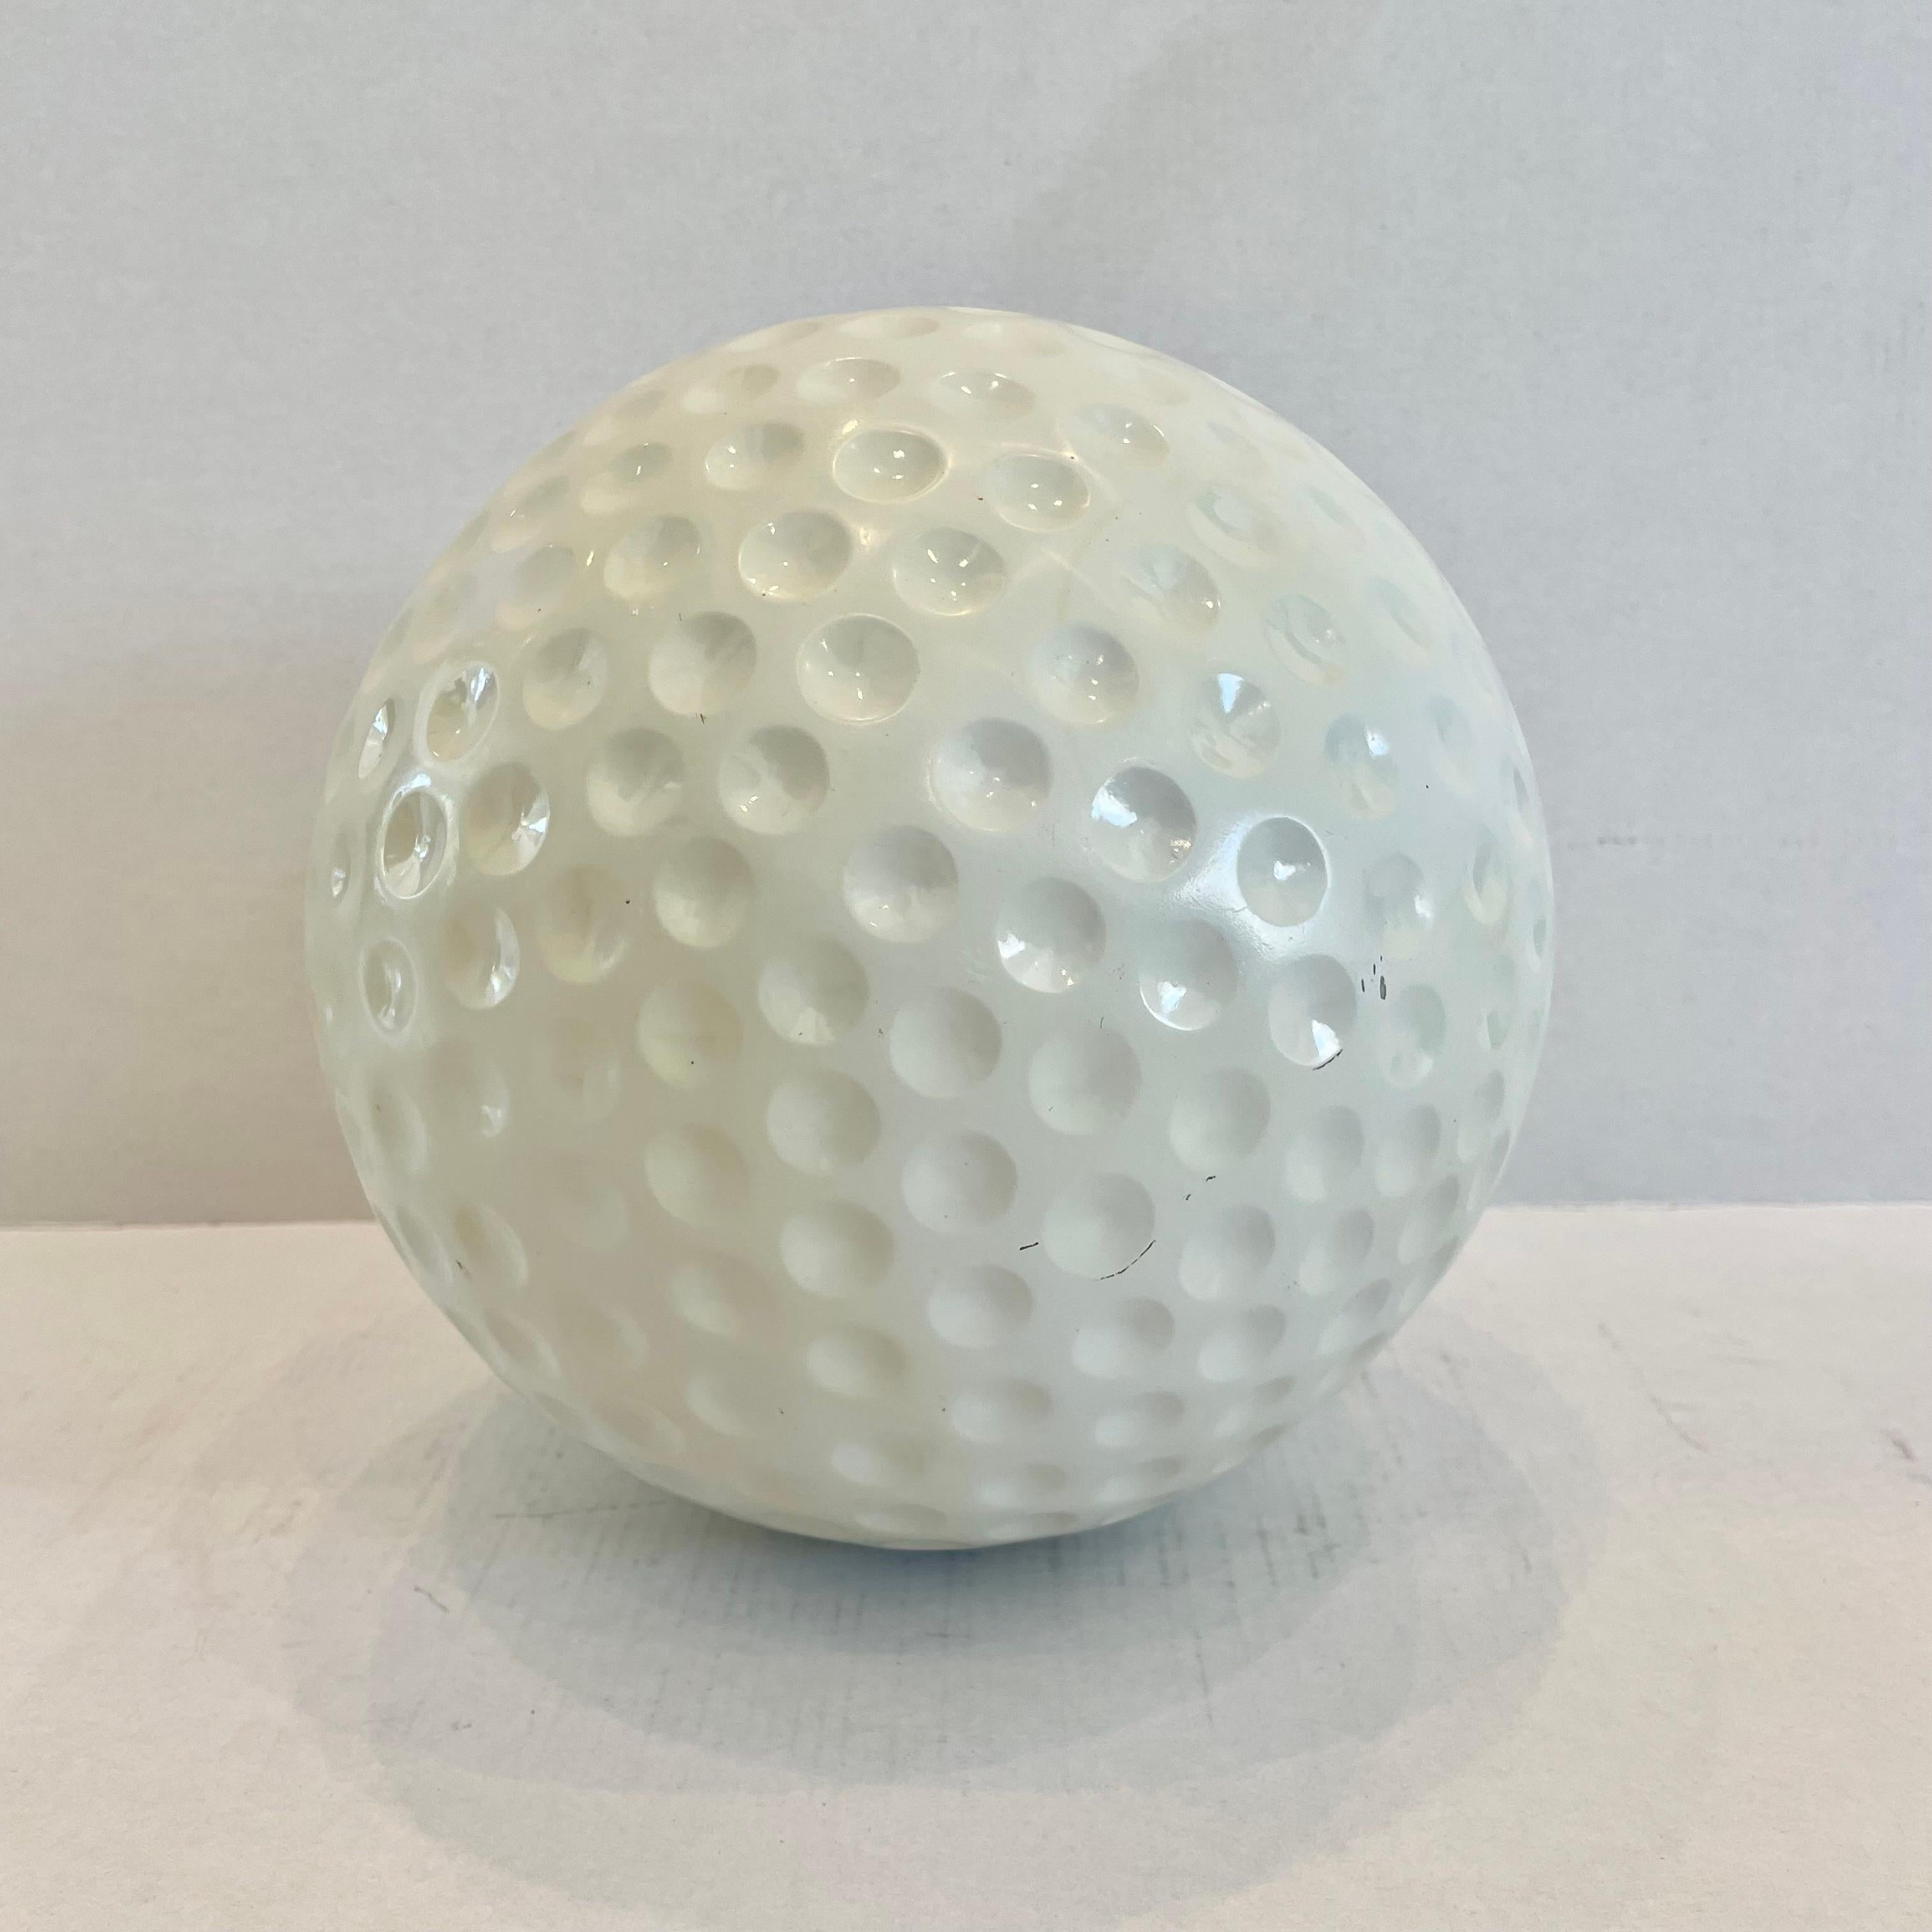 giant golf ball for sale